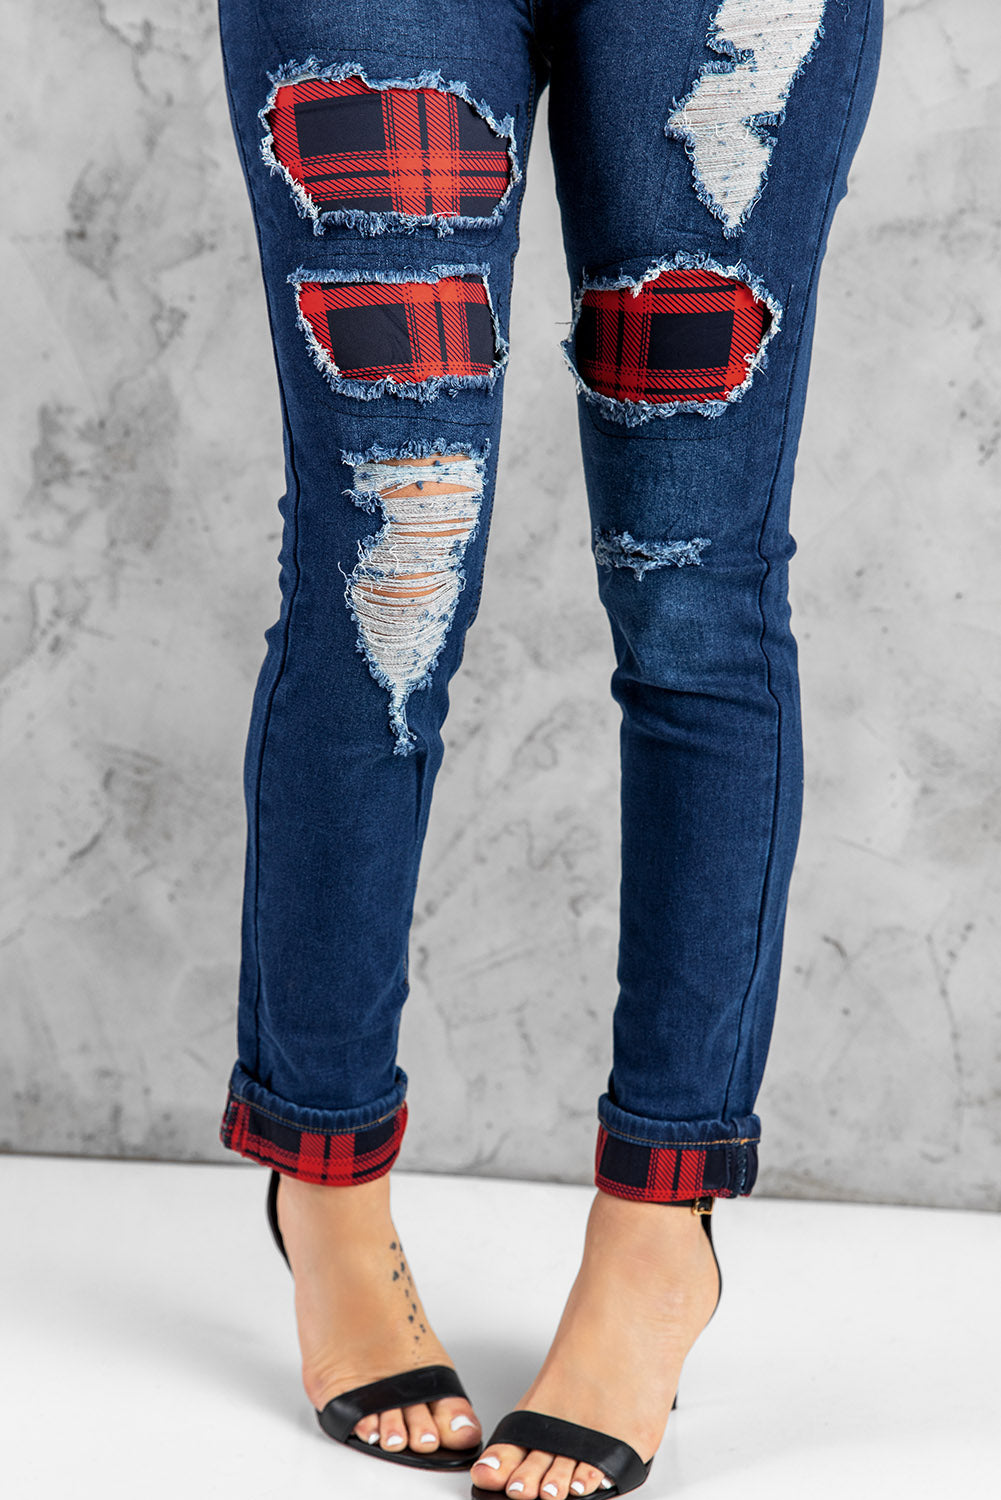 Red Ladies Ripped Boyfriend Jeans Hollow Out Leopard Denim Pants LC78394-3